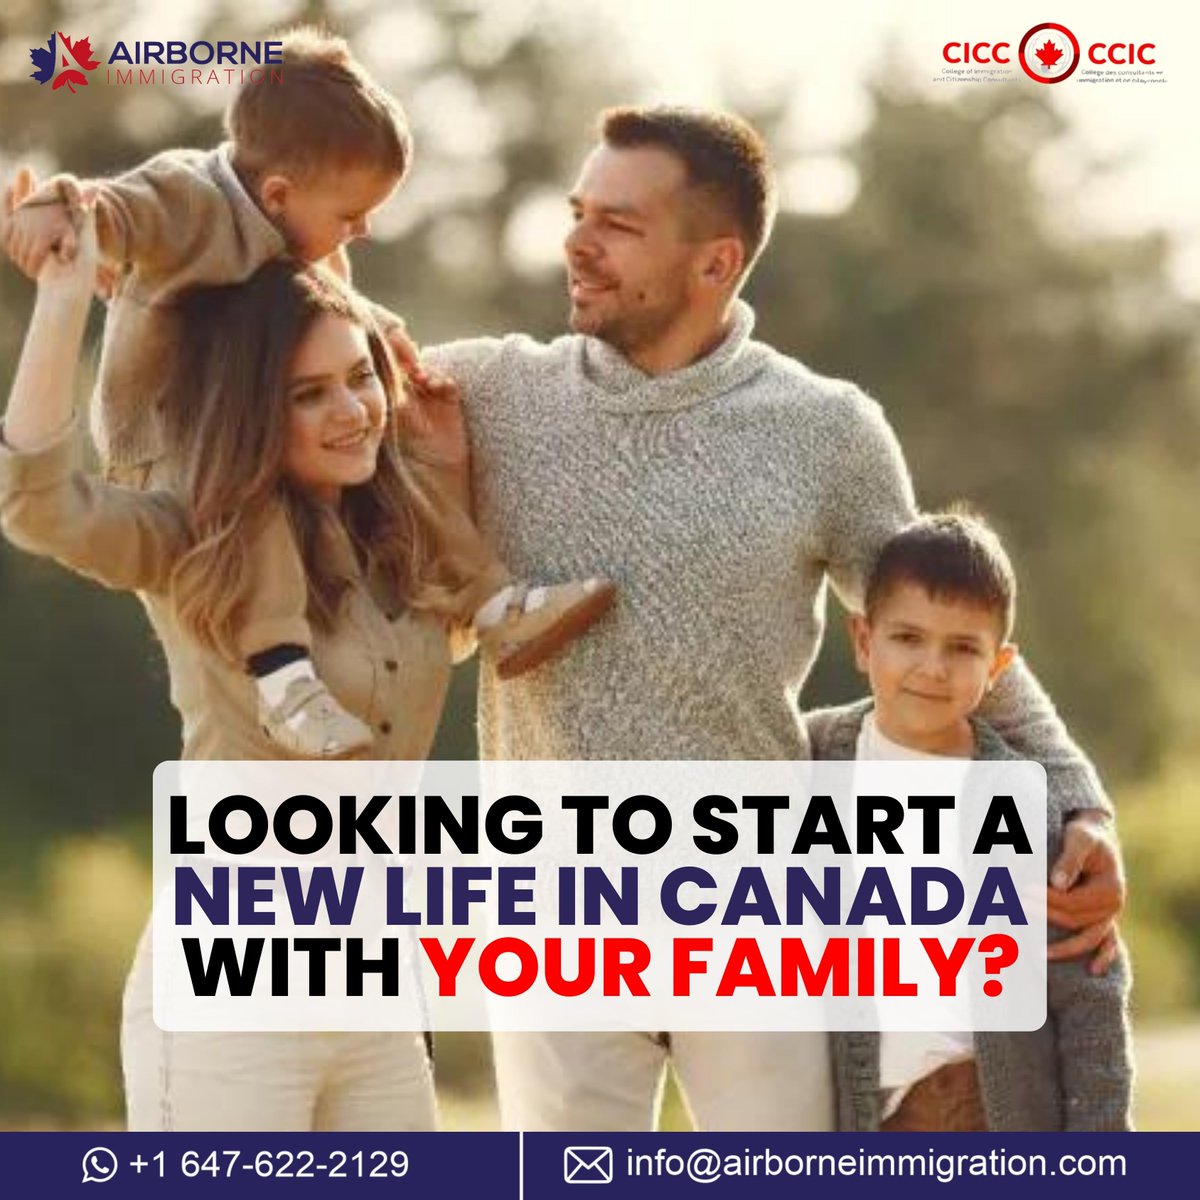 Canada is the perfect place to start a new life and create lasting memories with your loved ones. Let's plan your journey together and make your dreams come true.
---
🌐 airborneimmigration.com
.
#airborneimmigration #canada #toronto #canada🇨🇦 #torontolife #torontopics